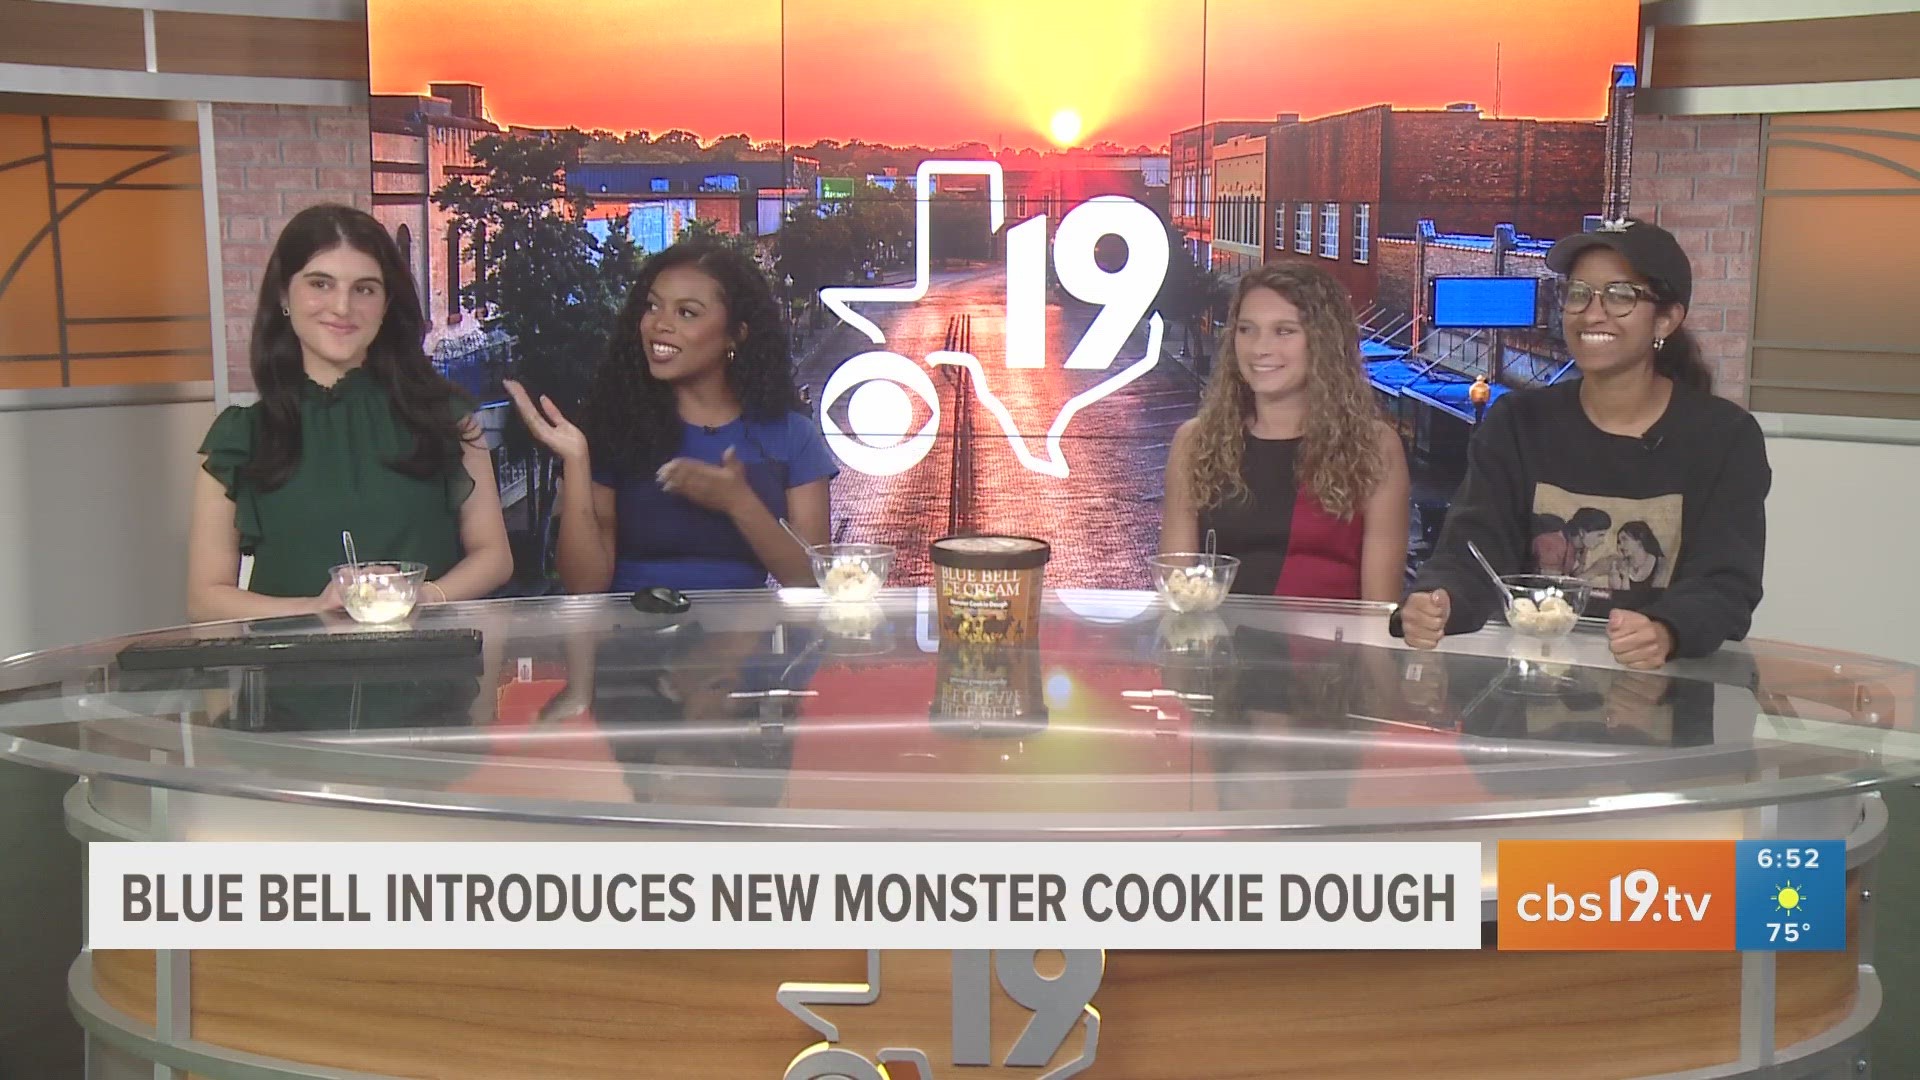 CBS19 Morning Y'all tries Blue Bell's new Monster Cookie Dough flavor